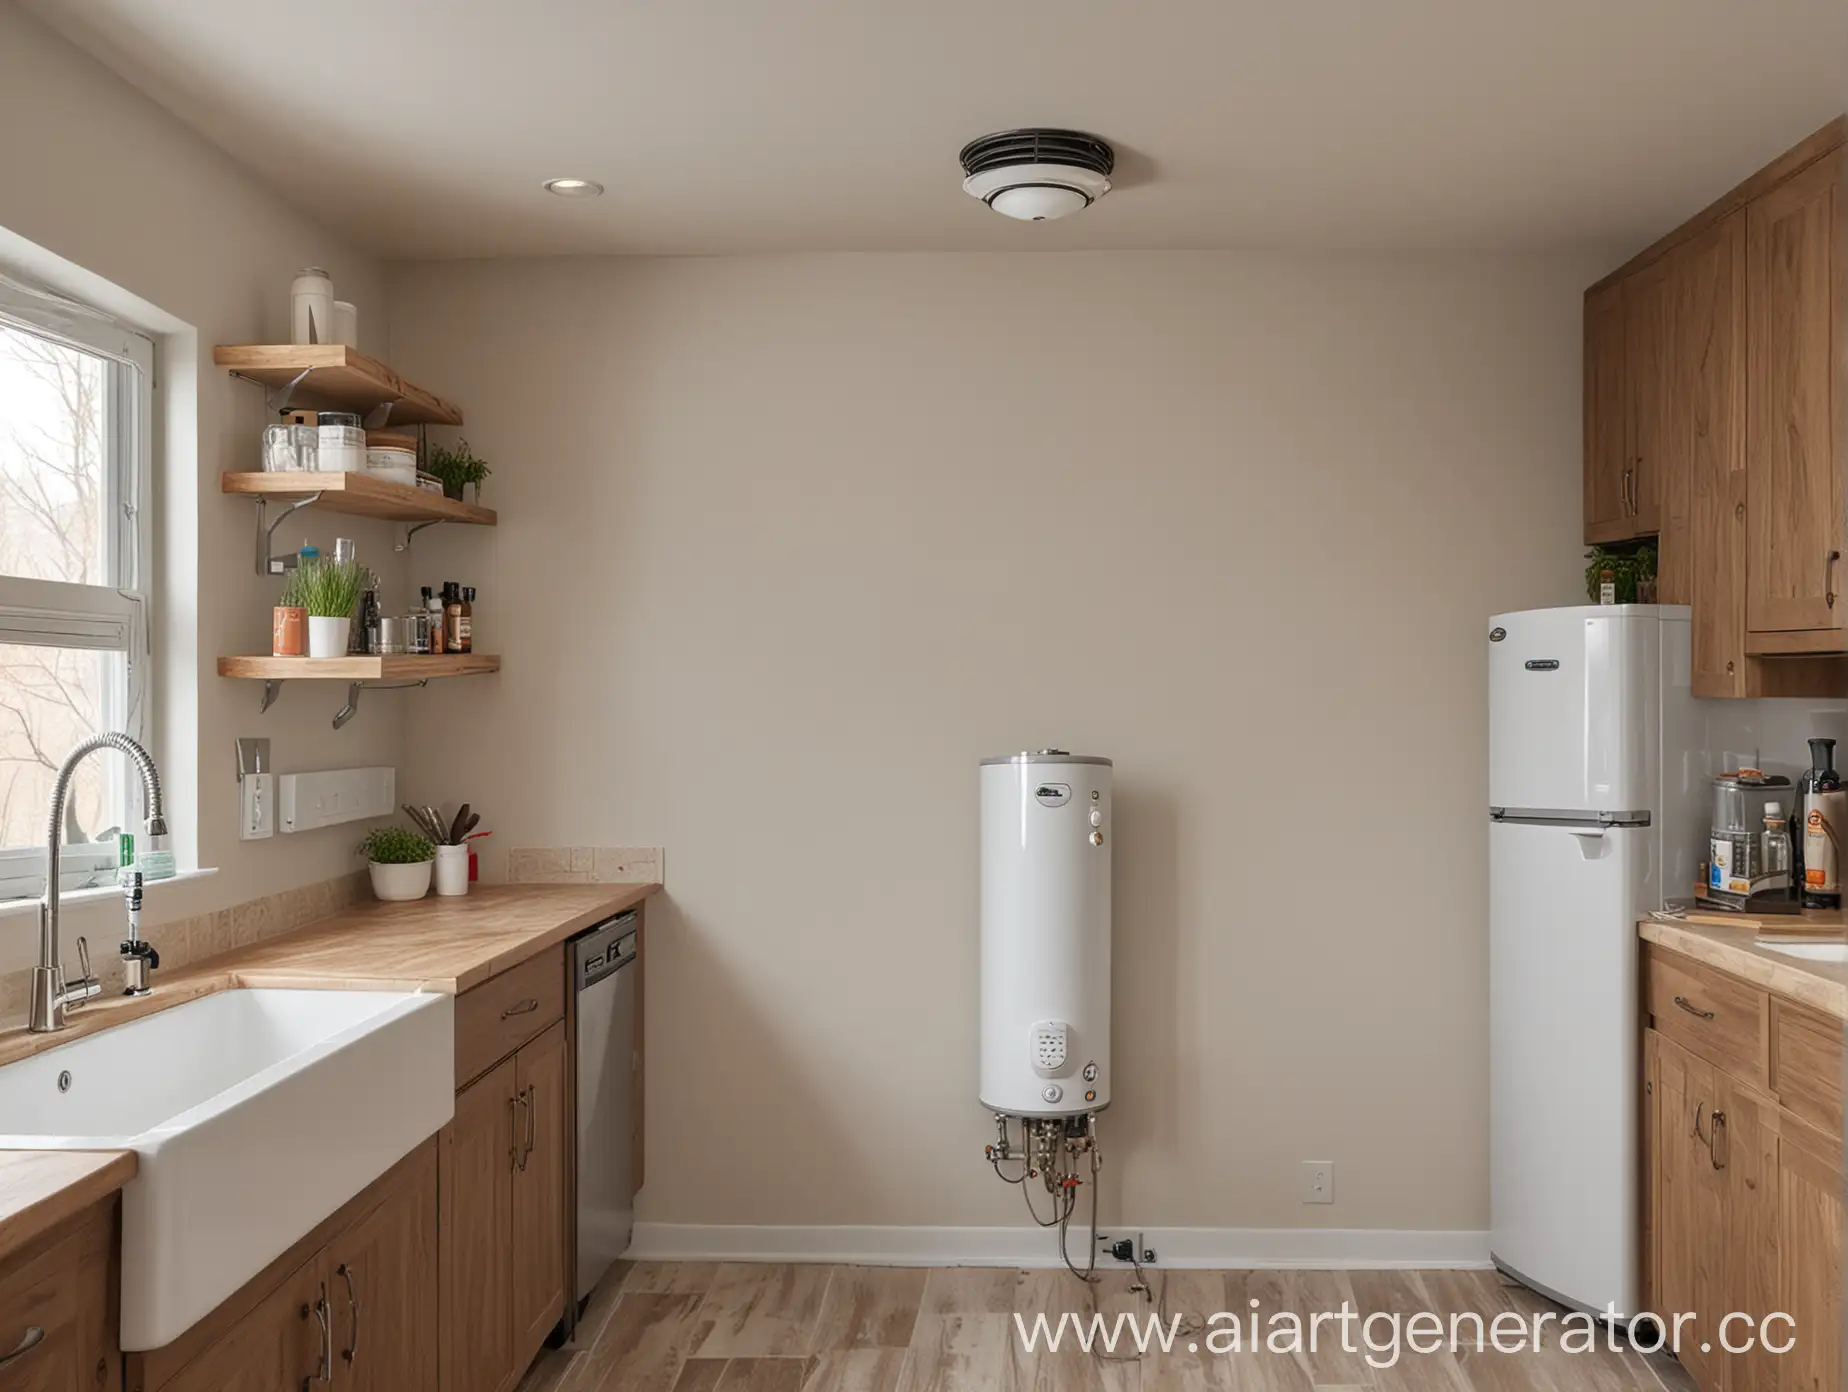 A water heater package that is installed on the modern kitchen wall and can be seen from far away.